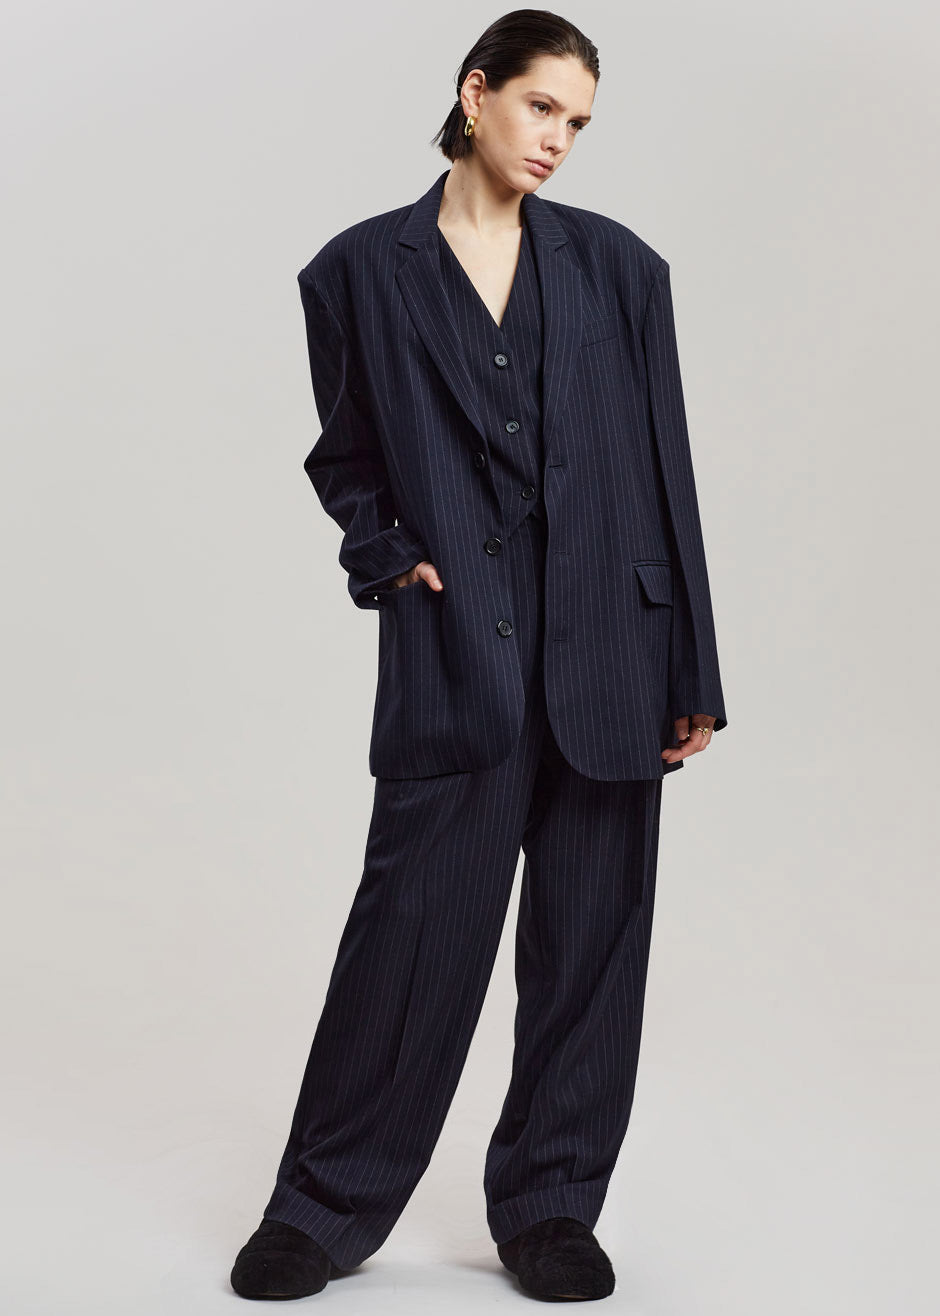 Tansy Tailored Vest - Navy Pinstripe - 5